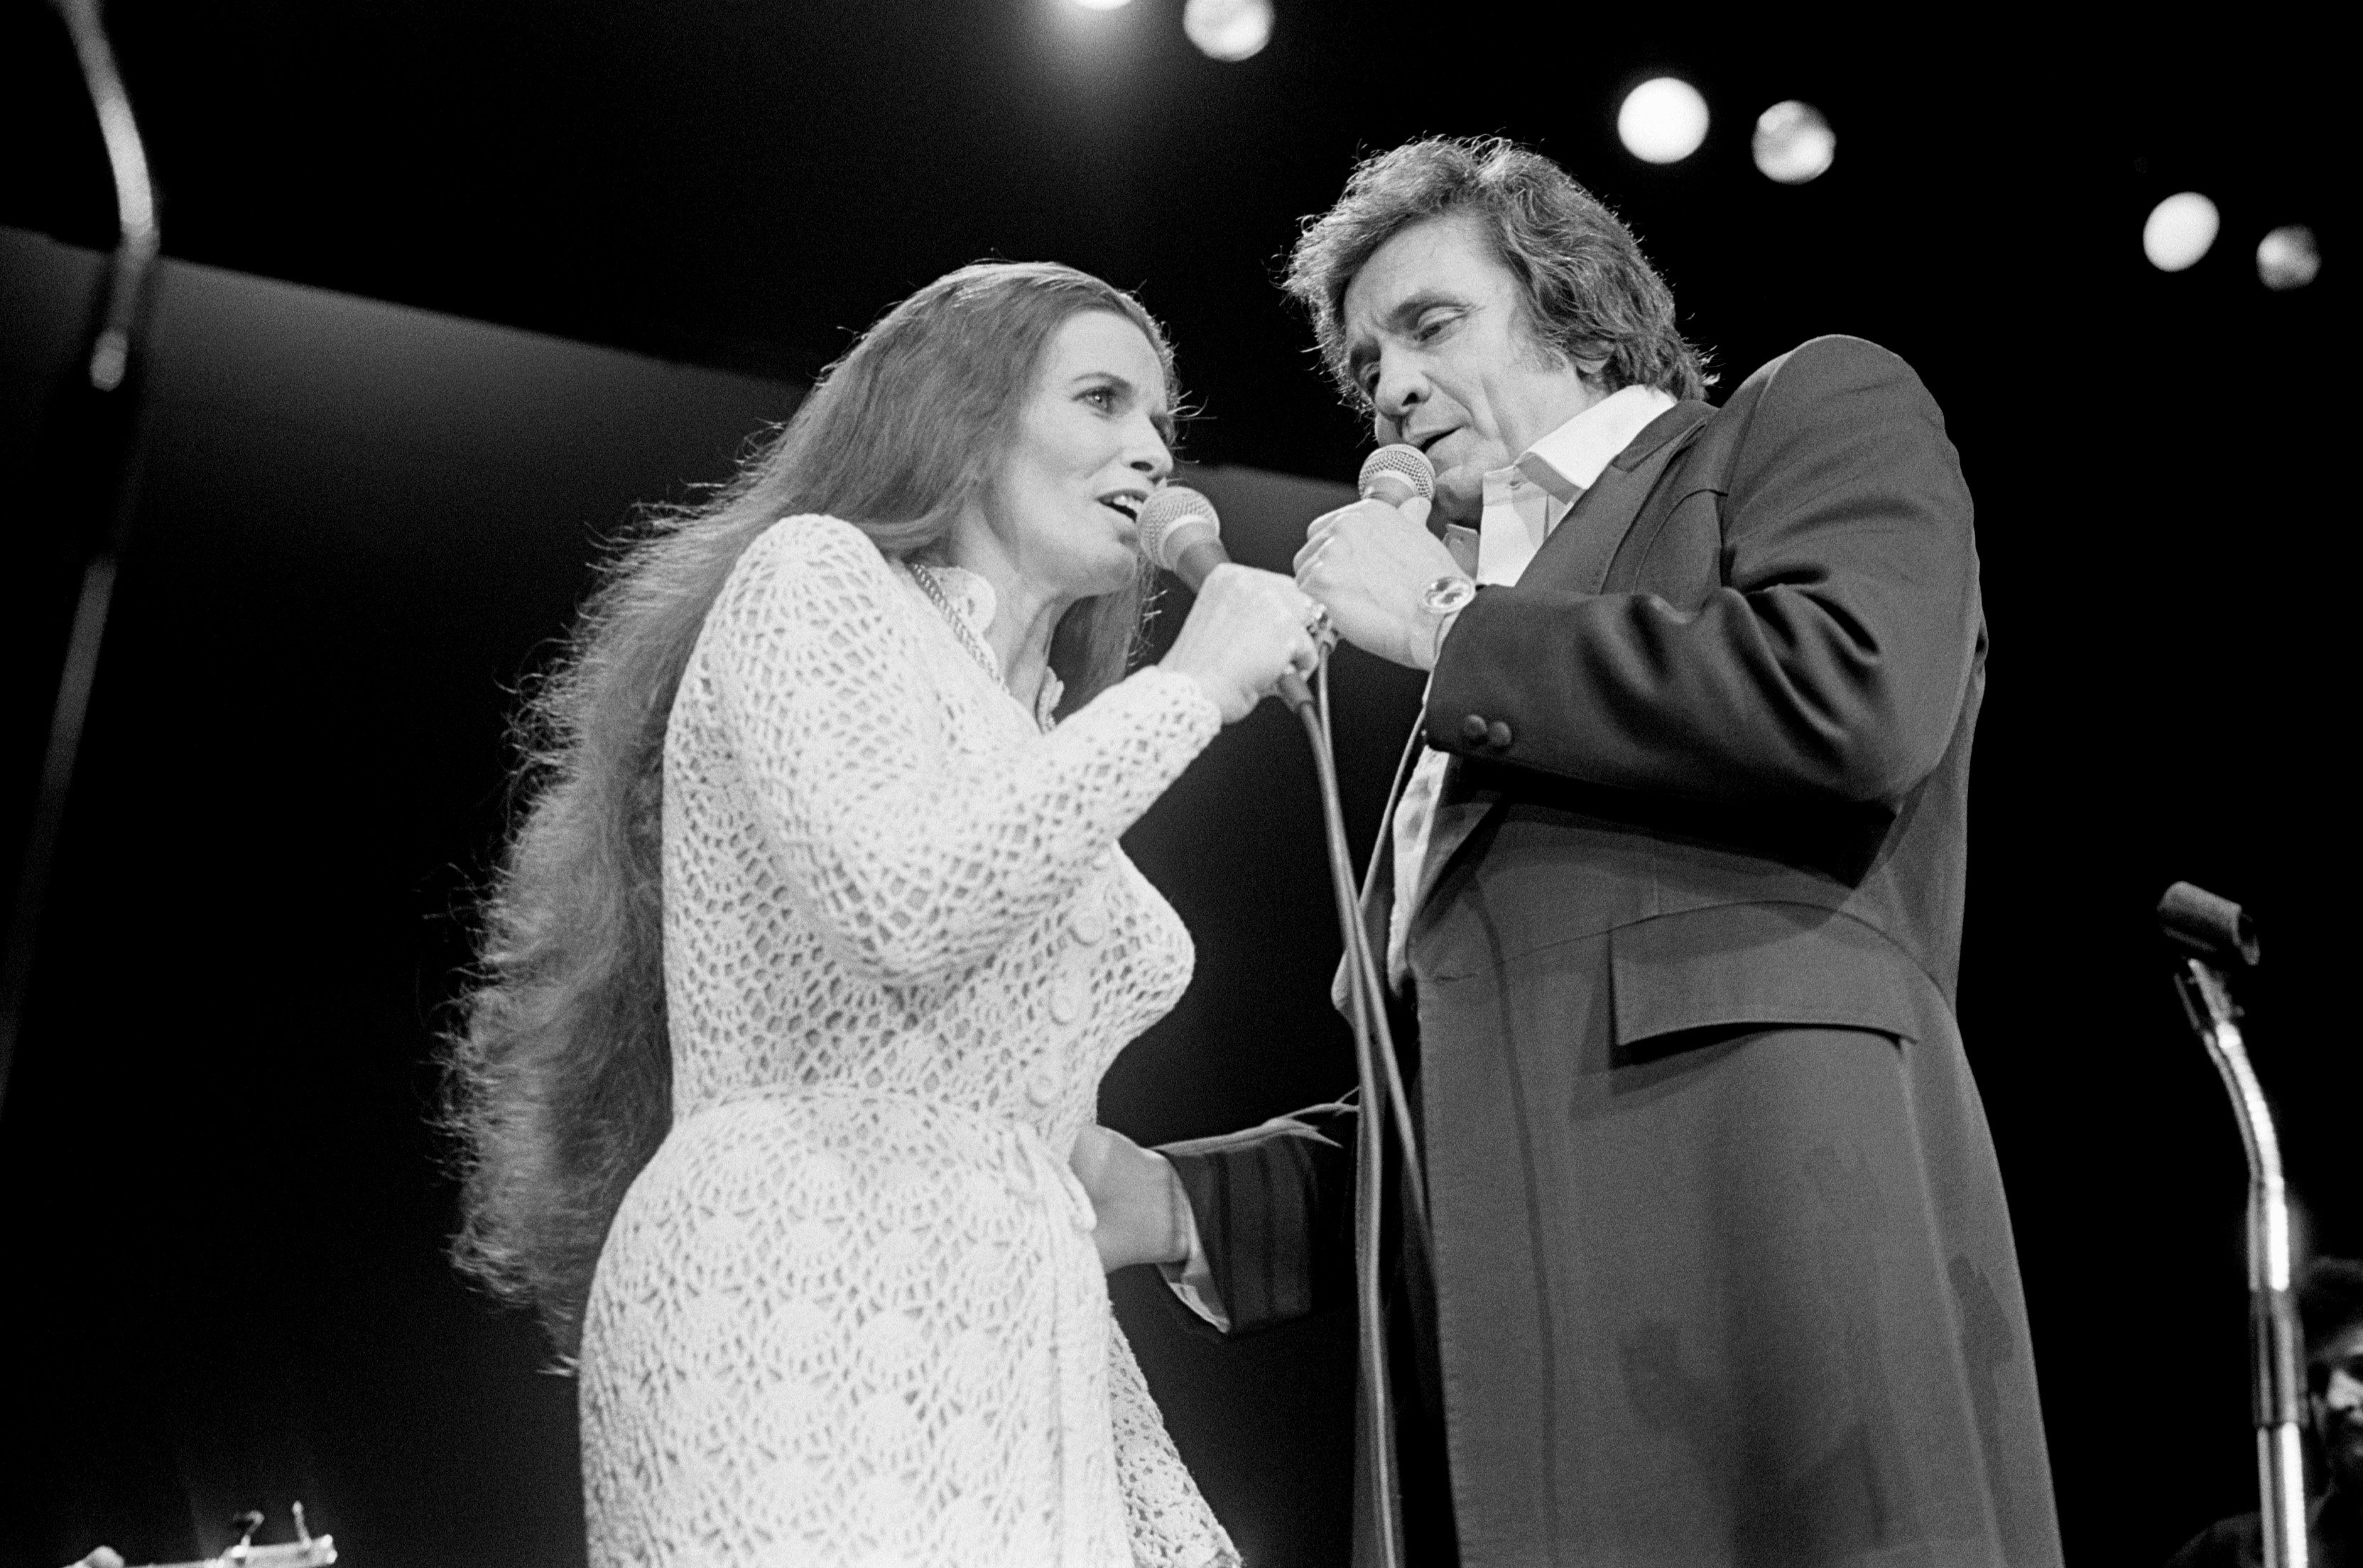 Johnny Cash with wife June Carter live at Wembley Conference Centre on 01/03/1979 | Photo: Getty Images